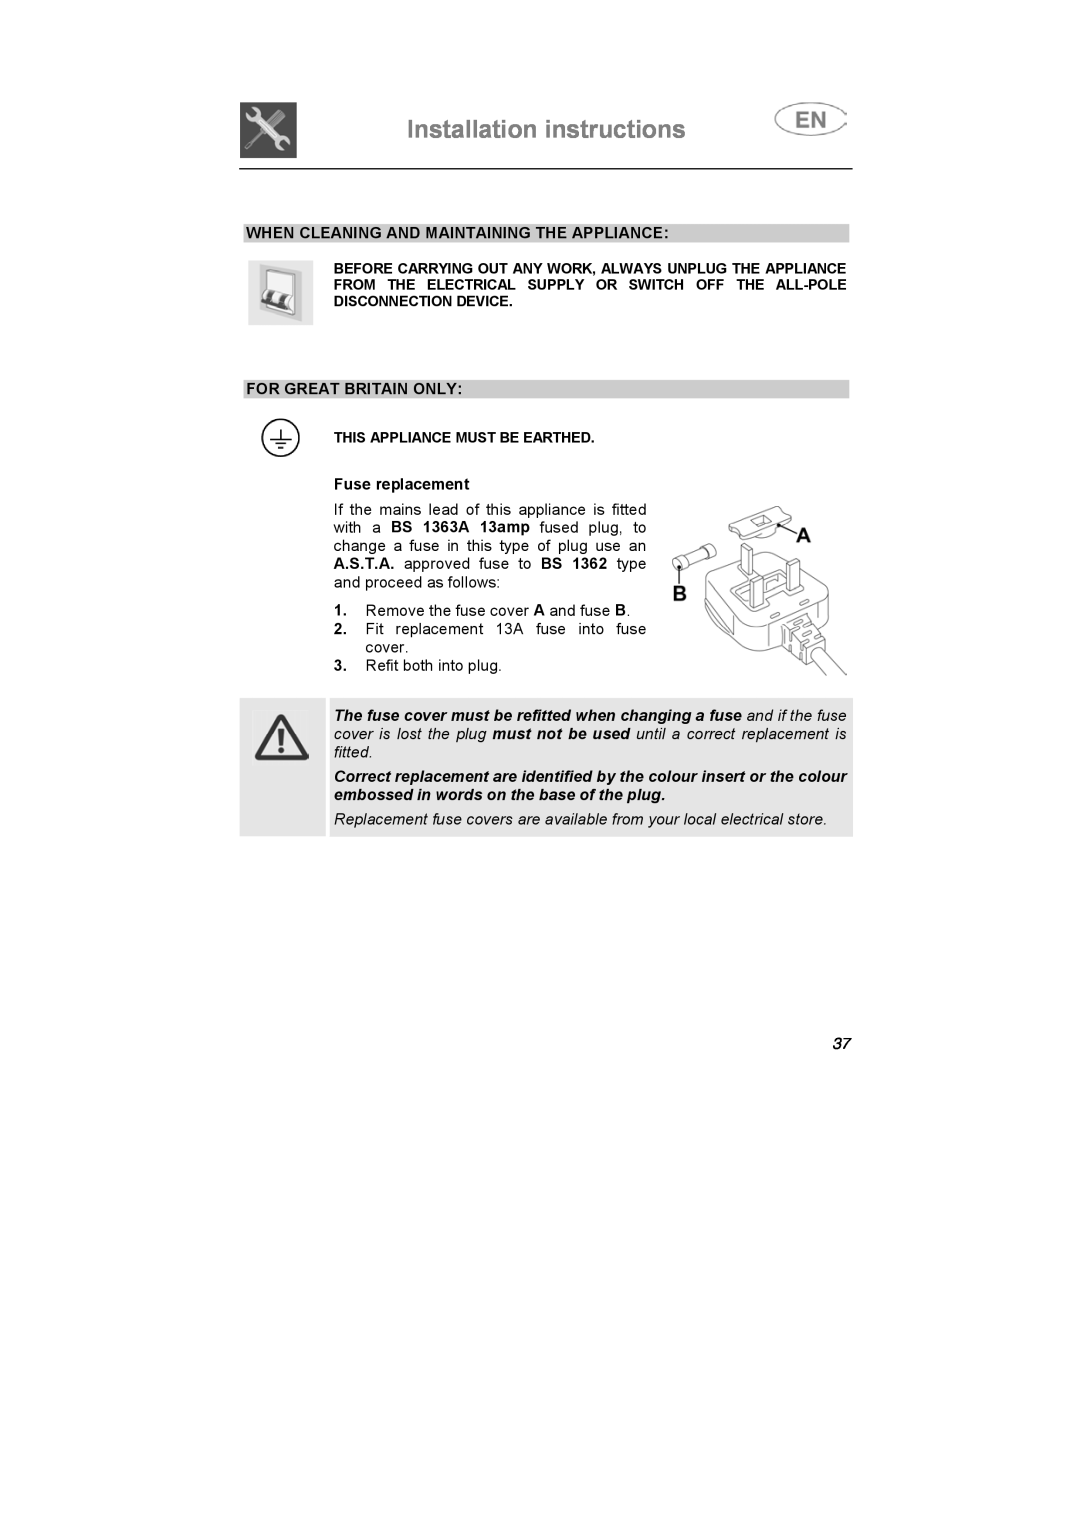 Smeg DD612S7 manual Installation instructions, When Cleaning And Maintaining The Appliance, For Great Britain Only 